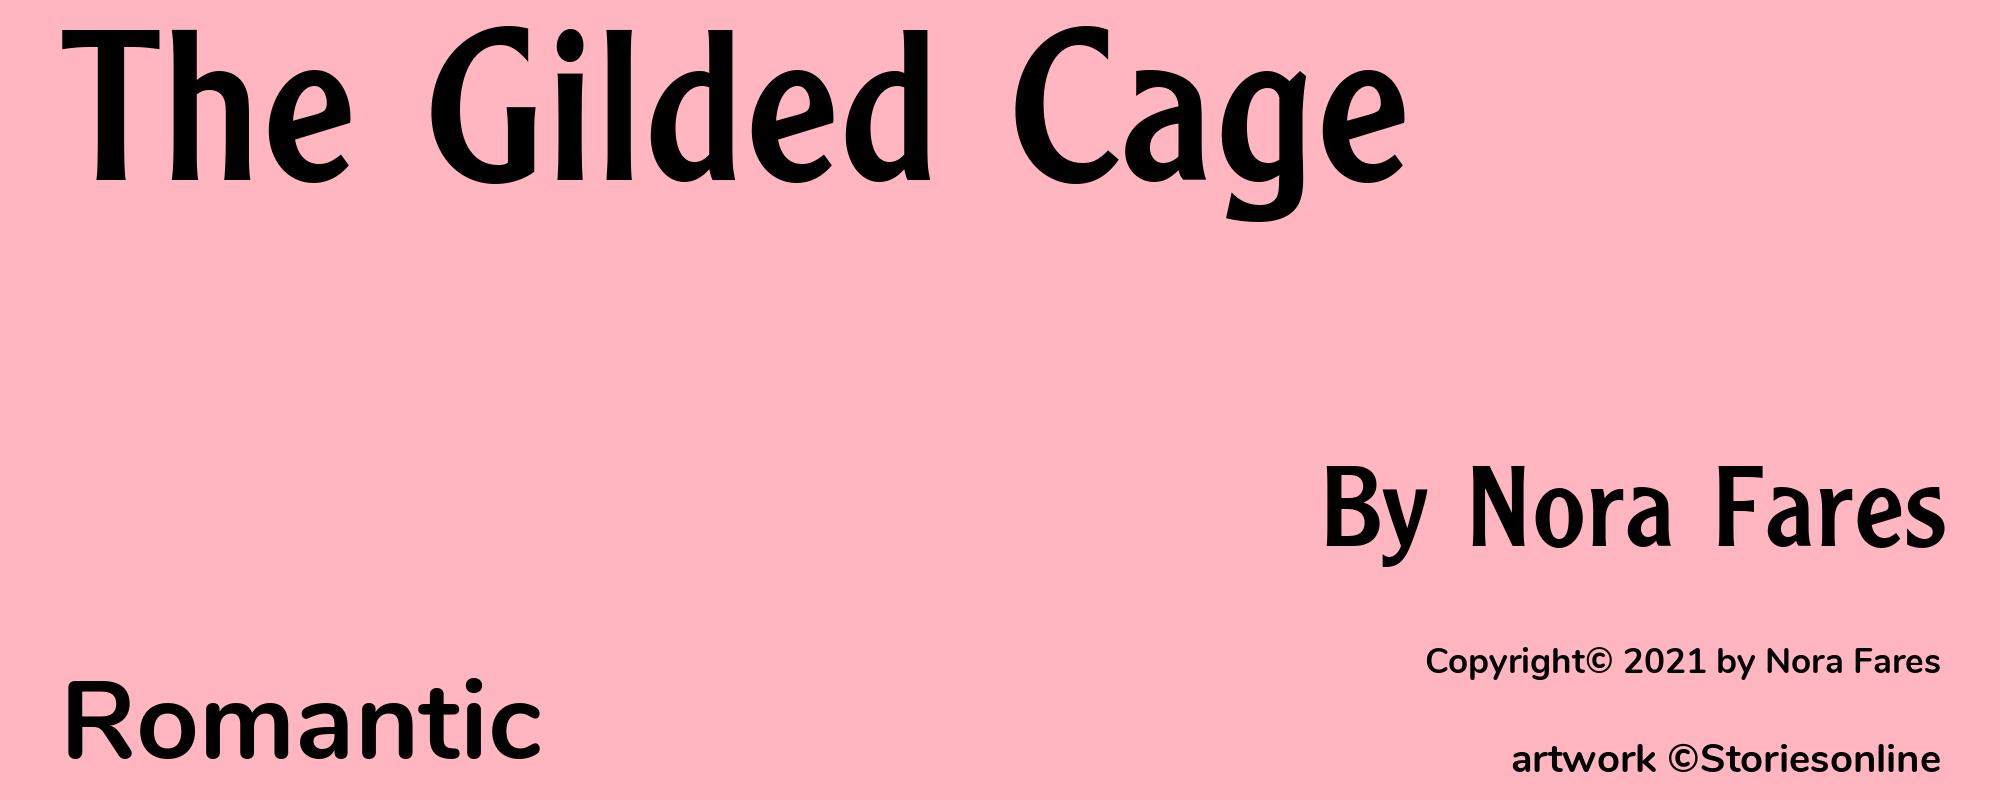 The Gilded Cage - Cover